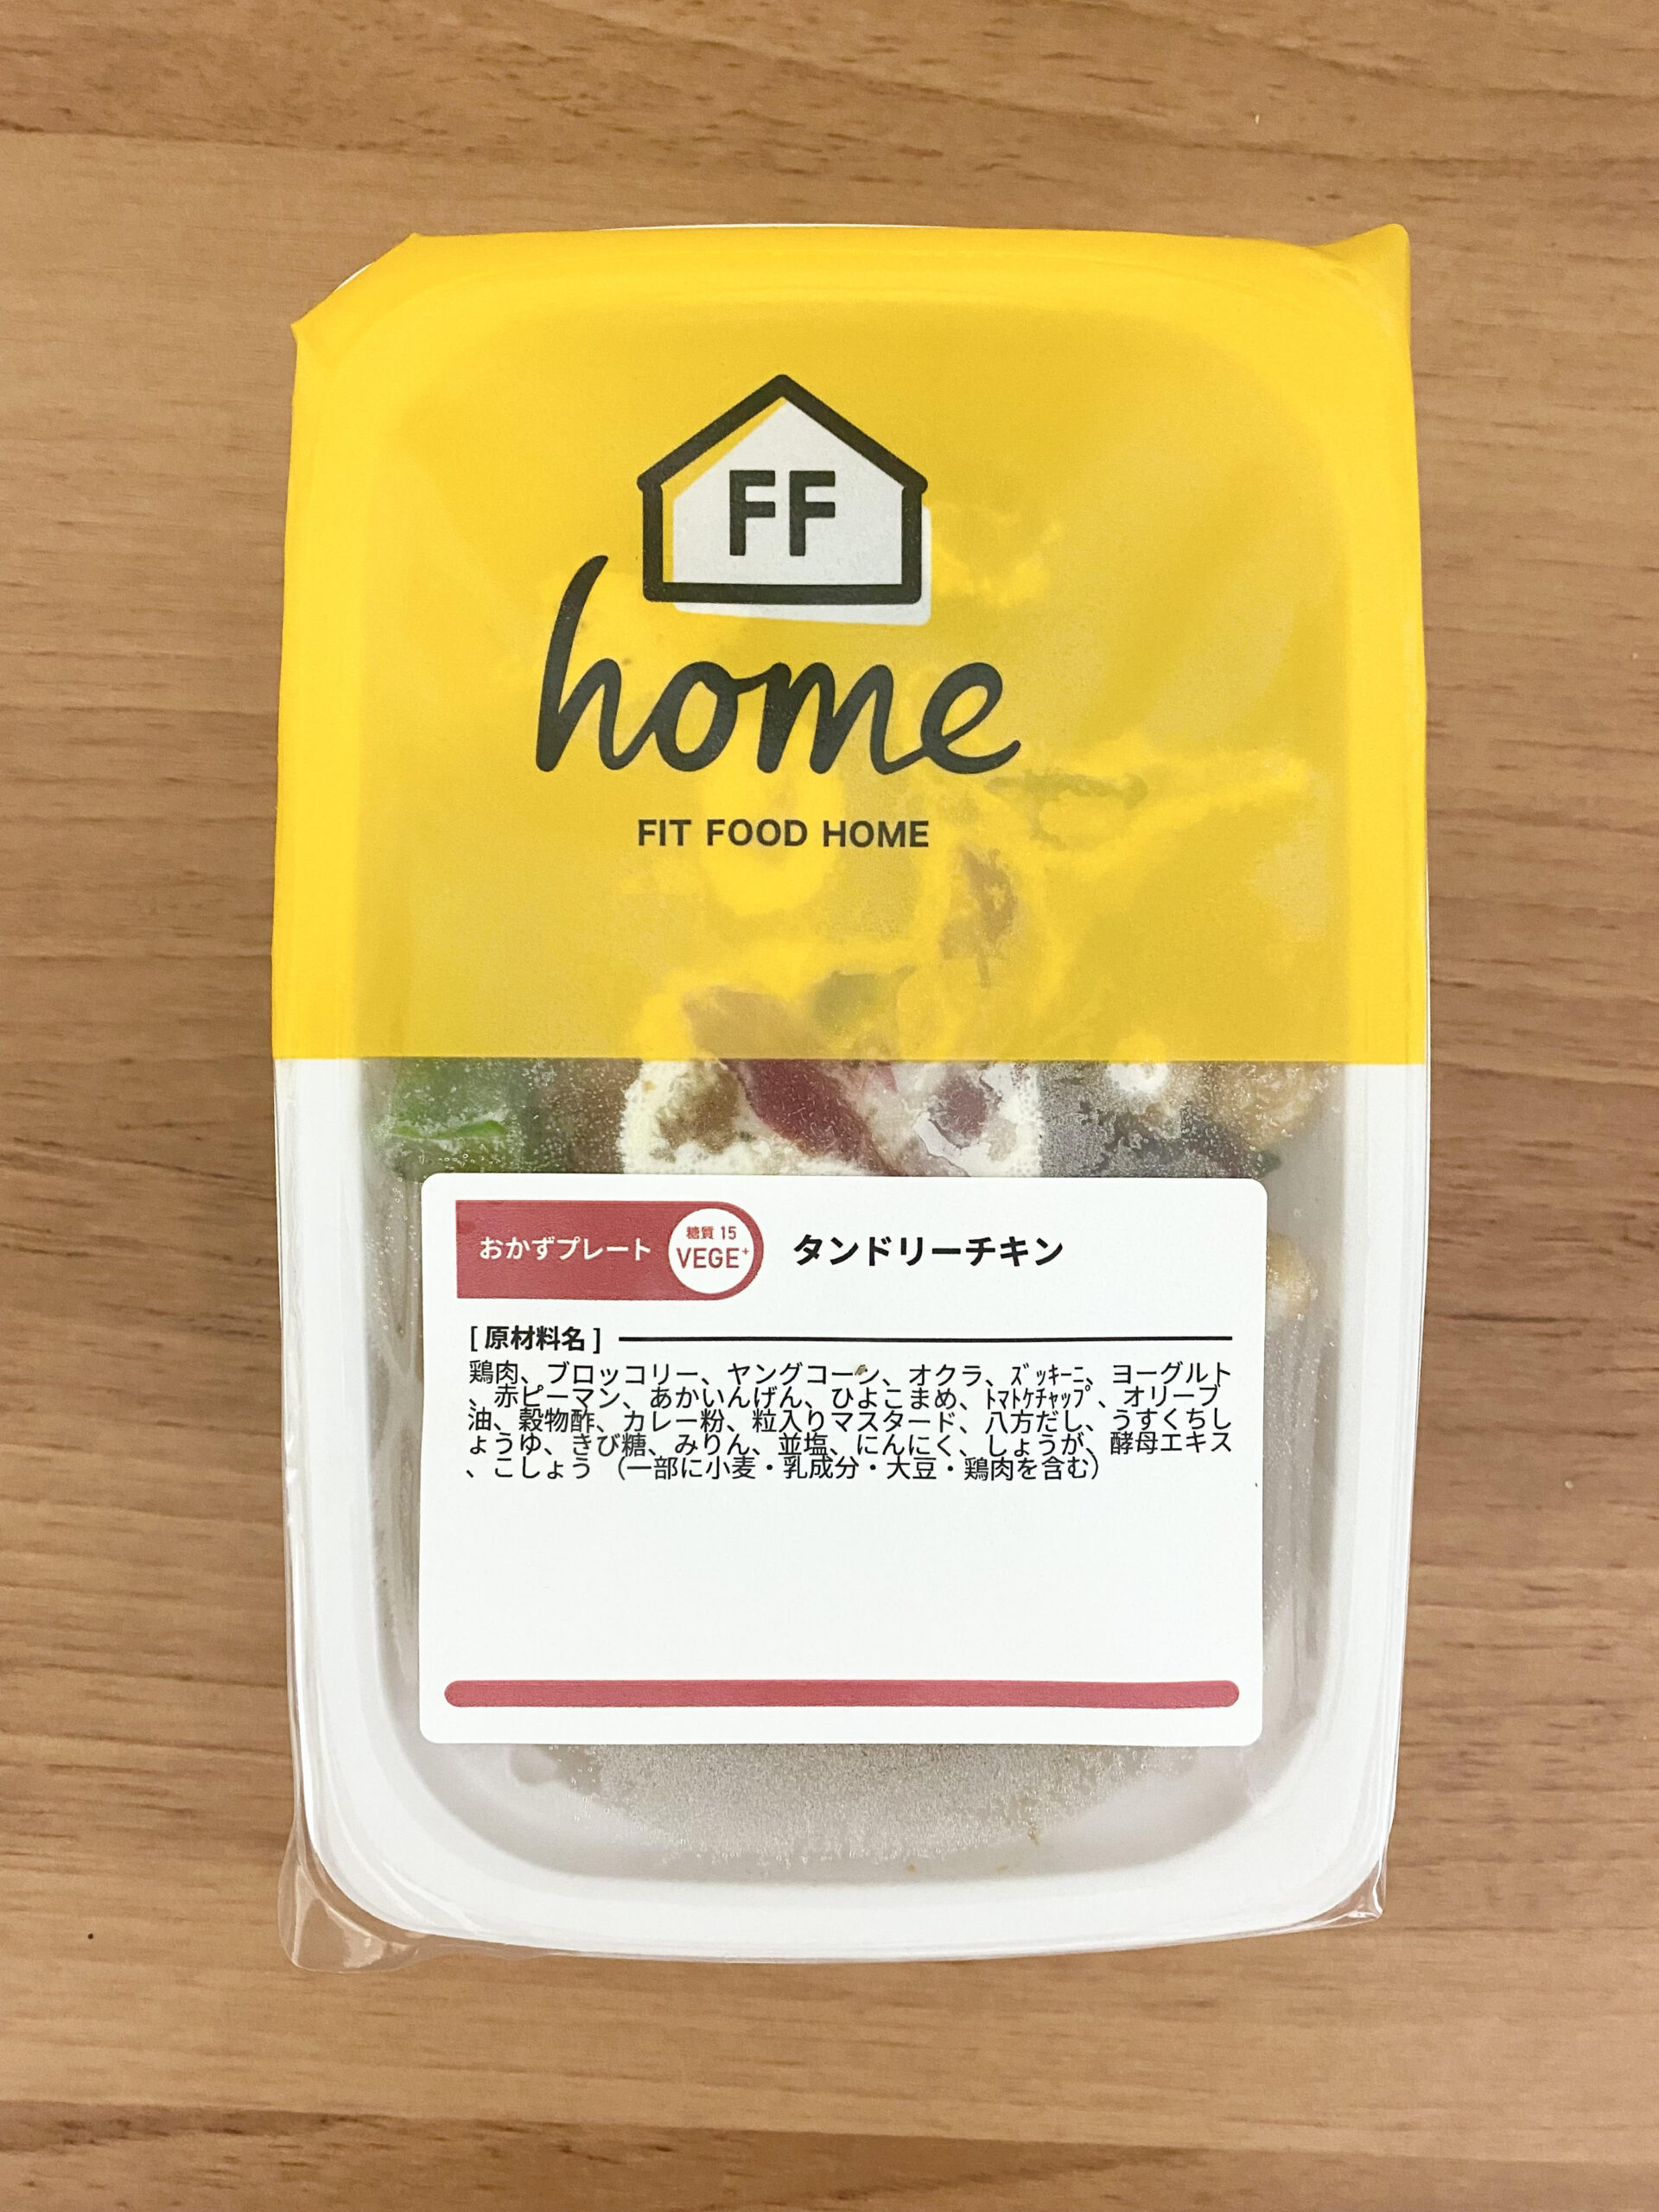 FIT FOOD HOME_低糖質VEGE＋_タンドリーチキン_原材料名